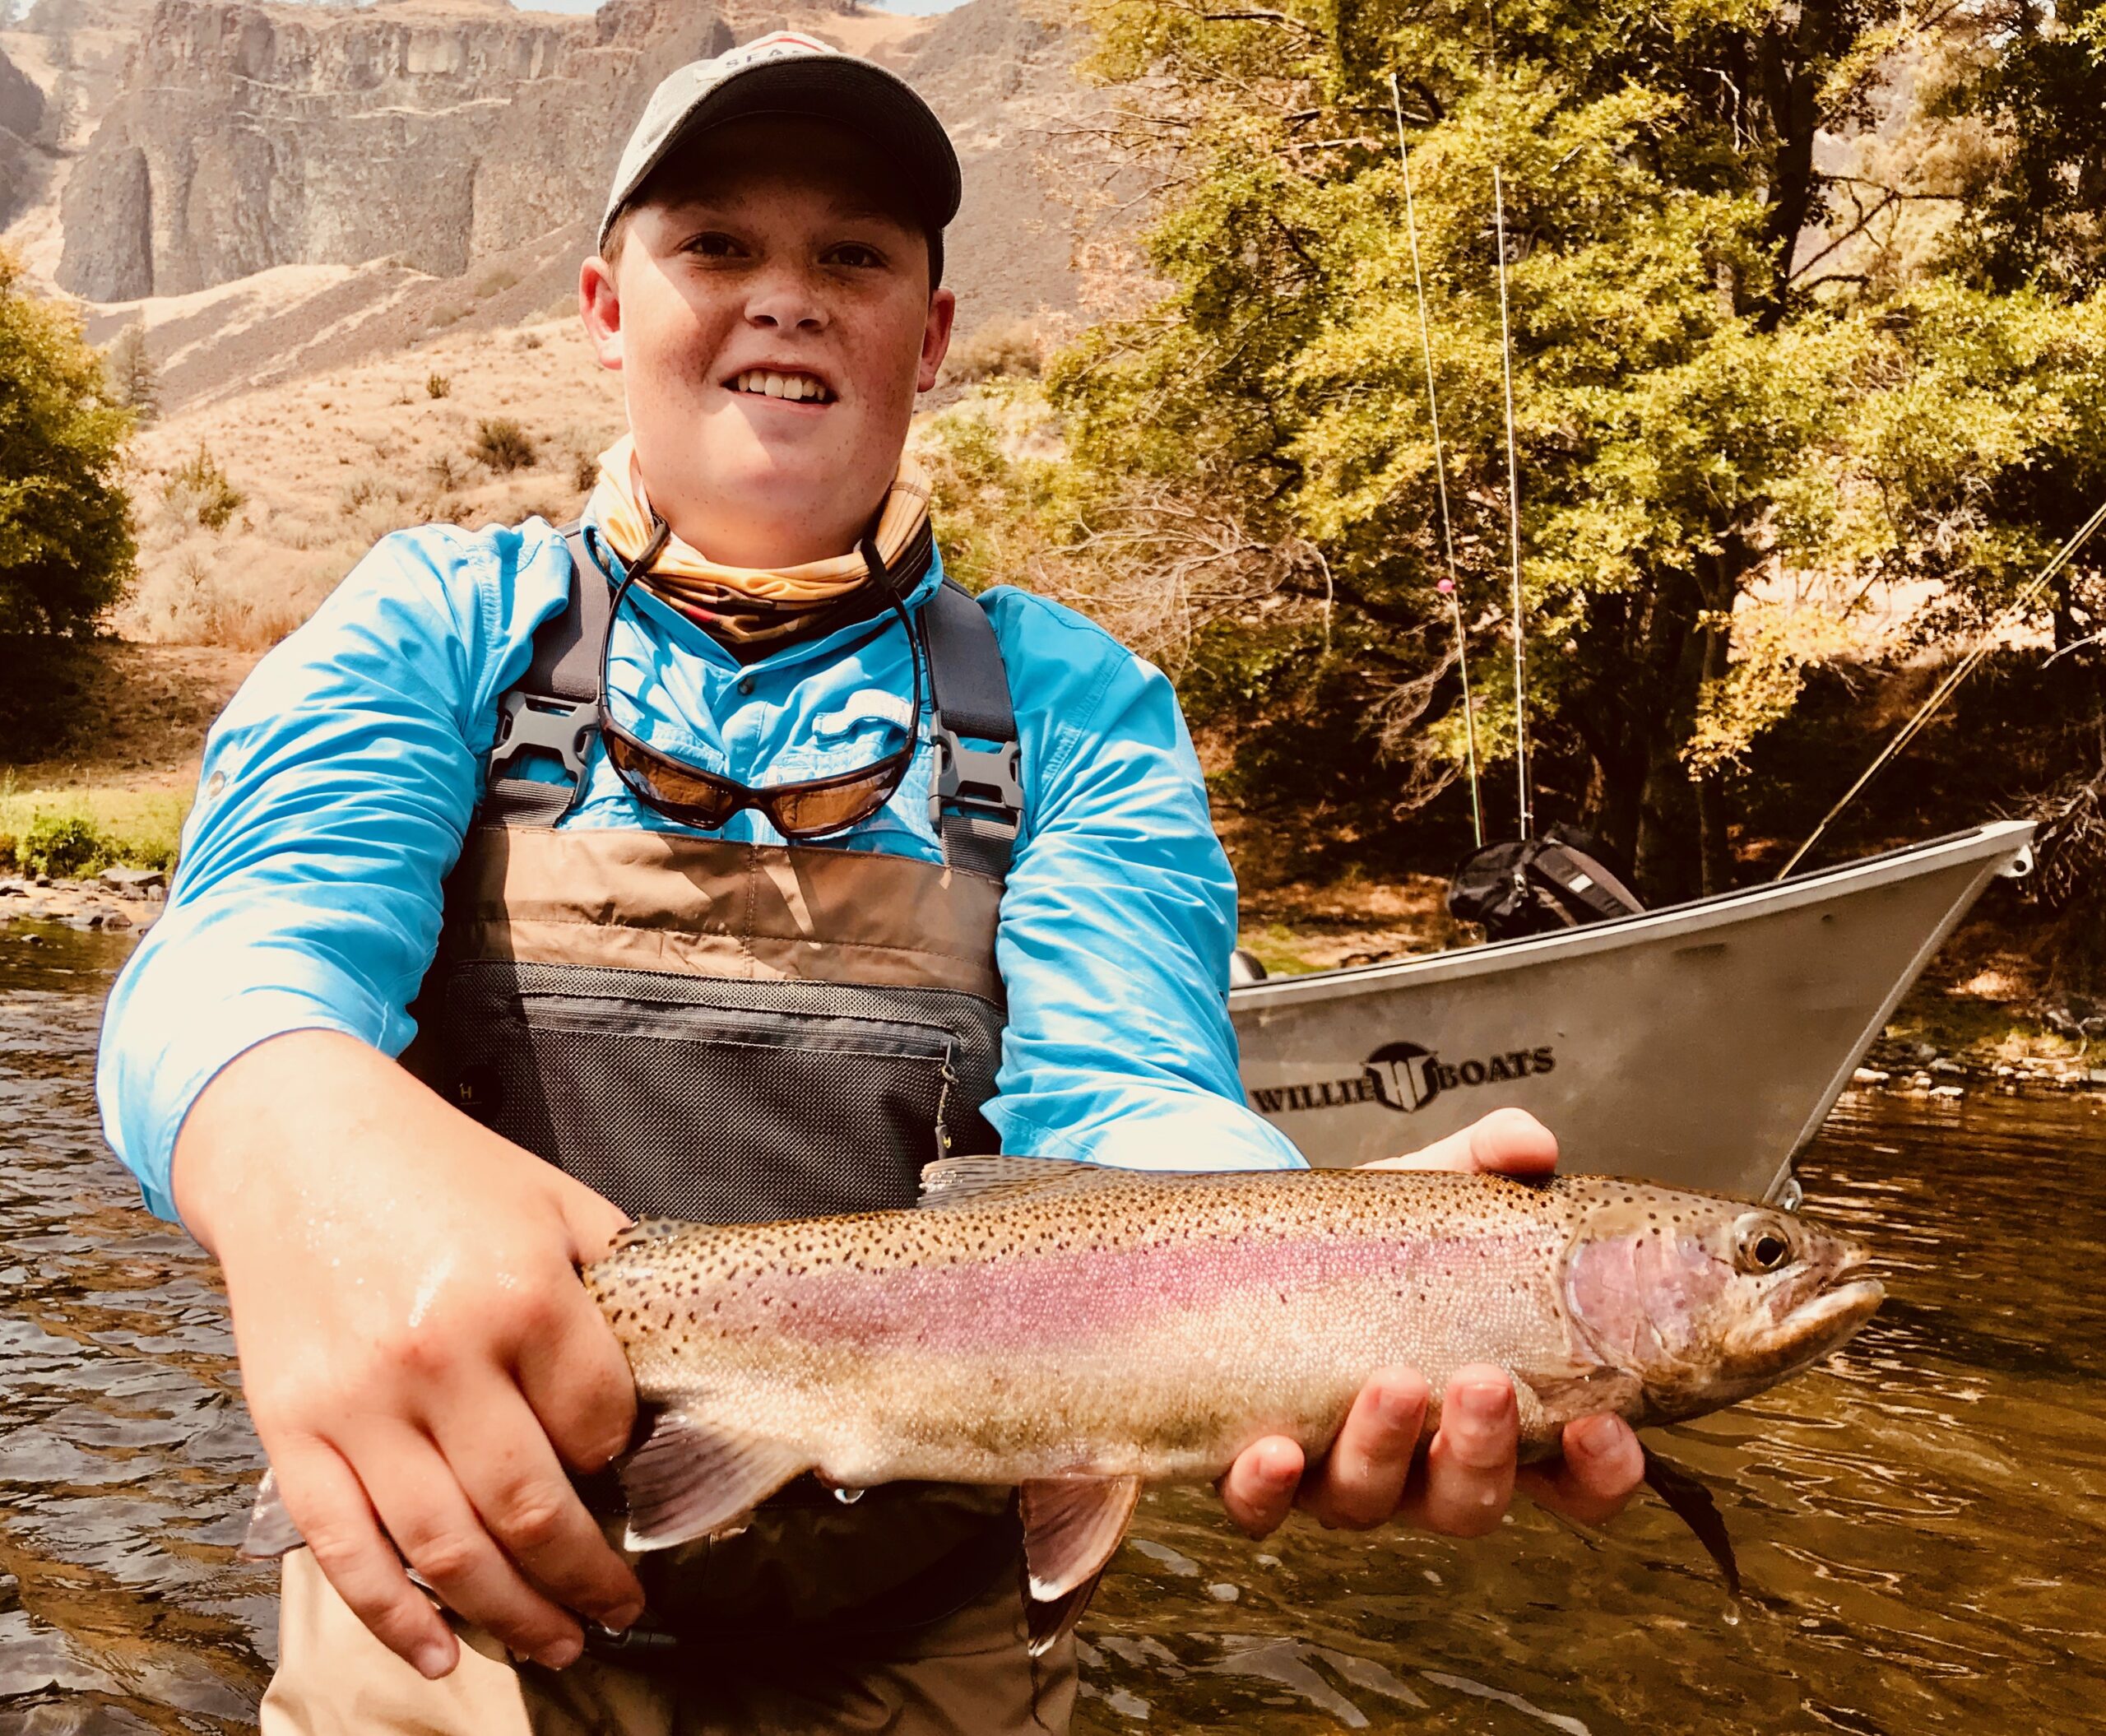 Native Redband Rainbow Trout Lower Deschutes River Guided Fly Fishing Griff Marshall Outdoors